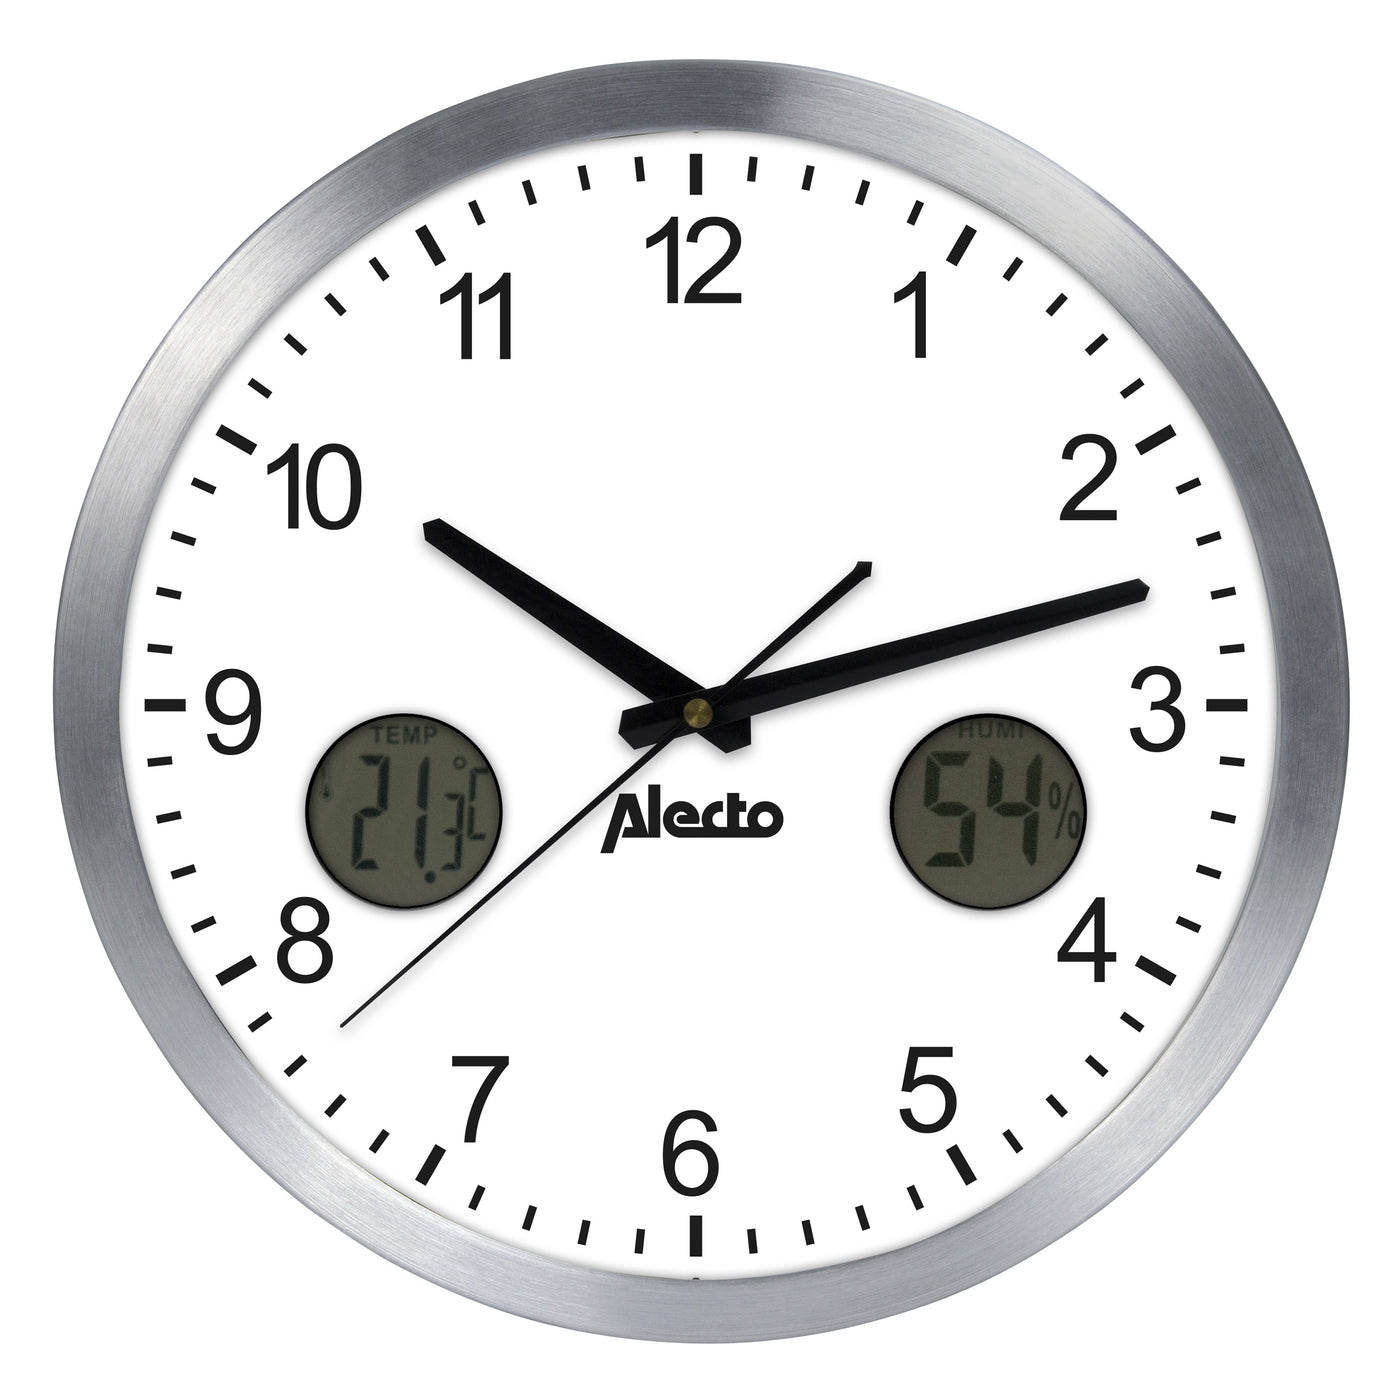 Alecto AK-15 - Large analog wall clock with thermometer and hygrometer - 30,5 cm diameter